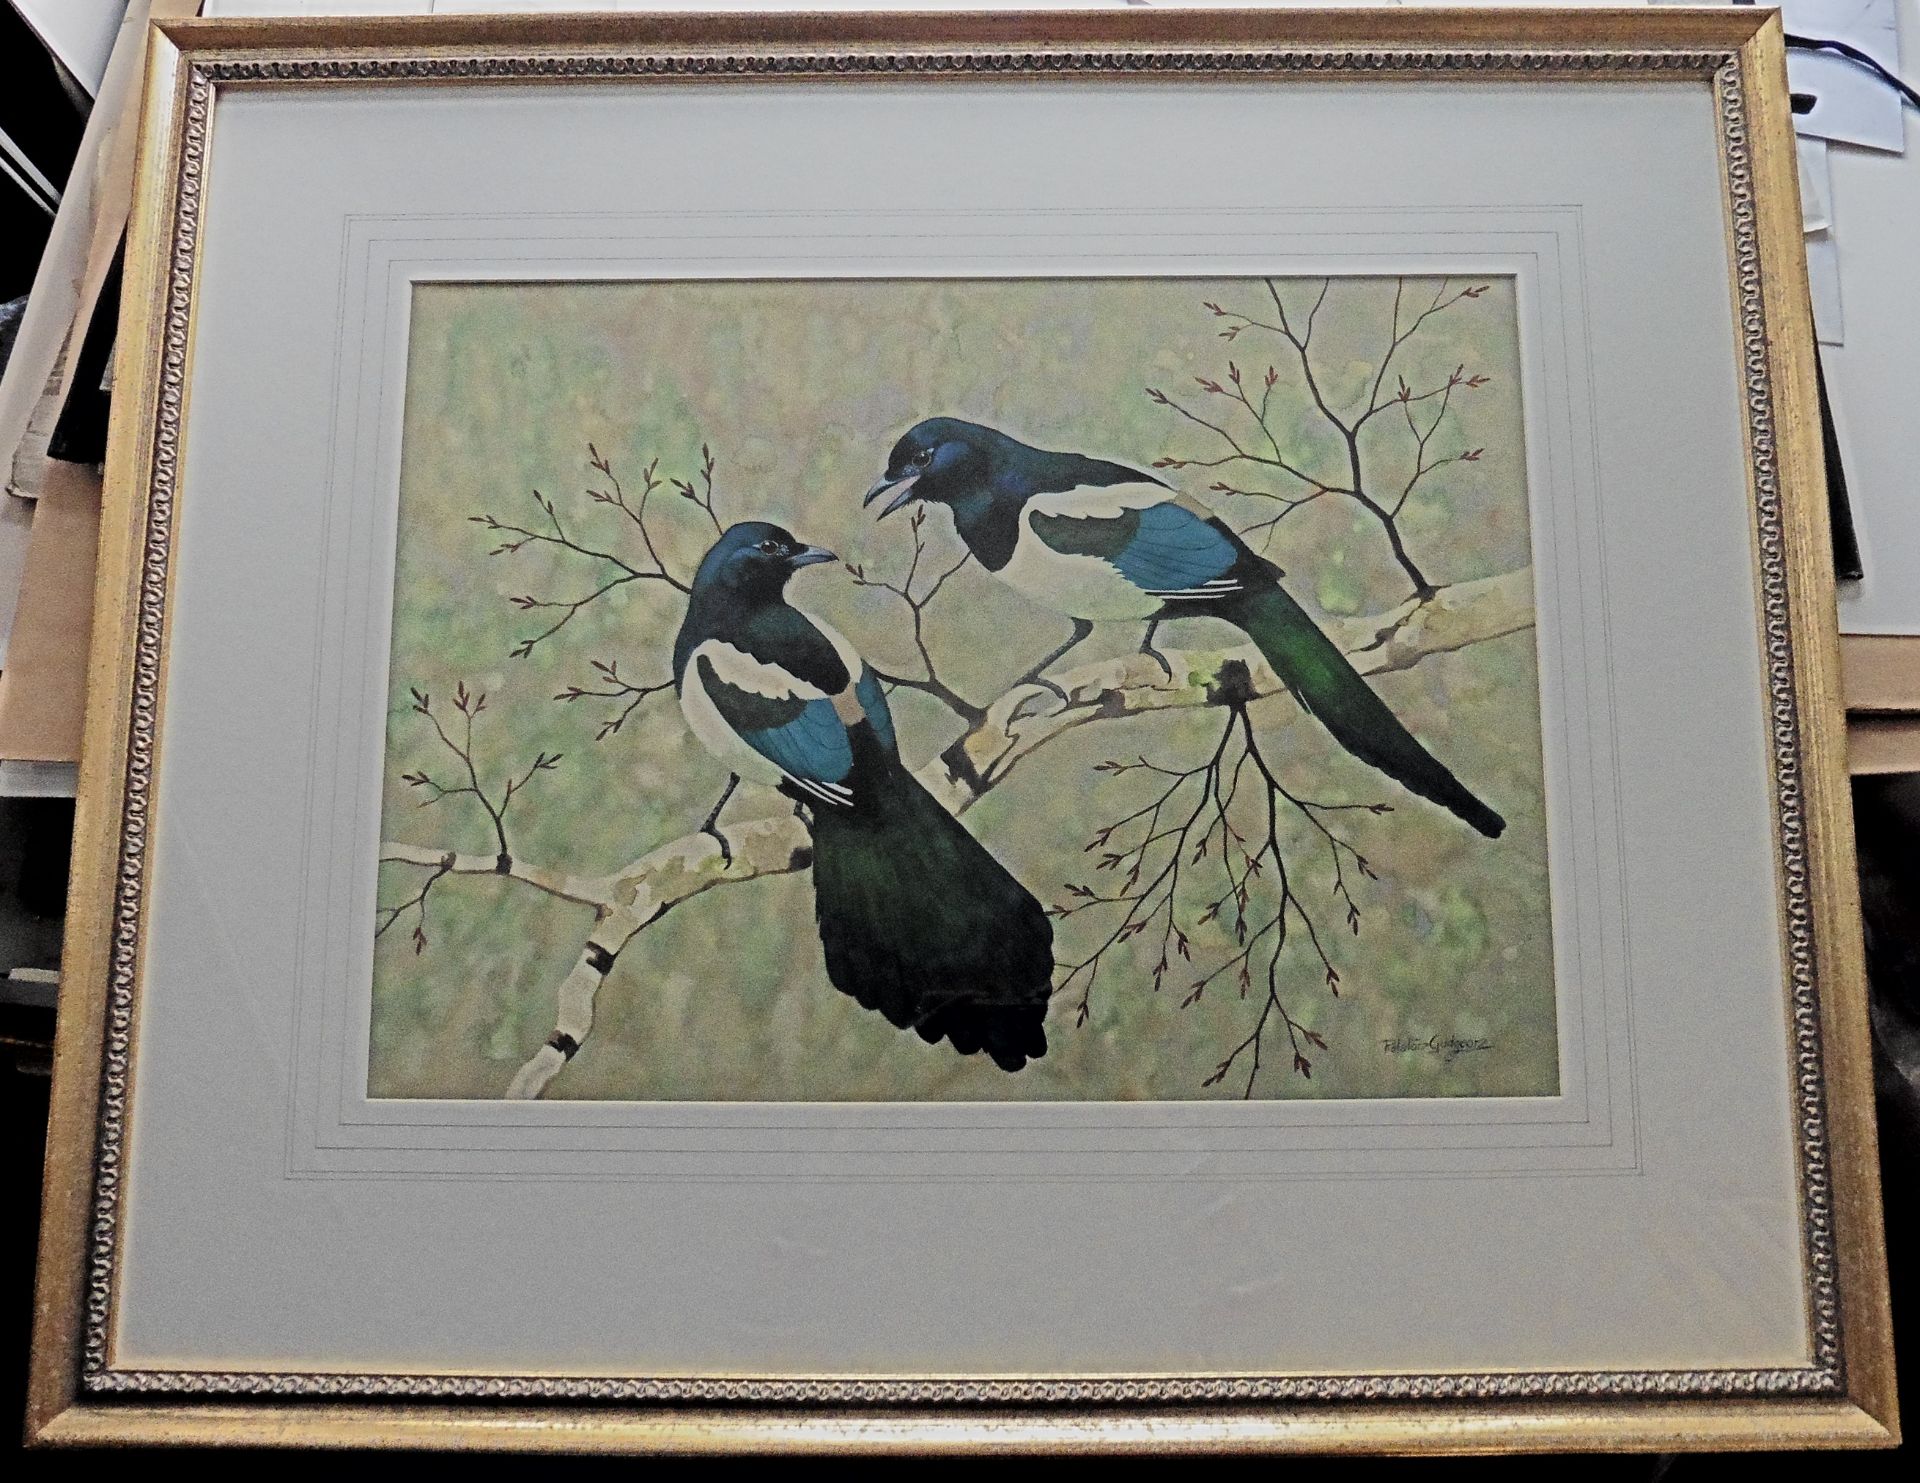 Ralston Gudgeon, Scottish 1910- 1984 large signed watercolour 'Magpies' Title Magpies Artist : - Image 4 of 4